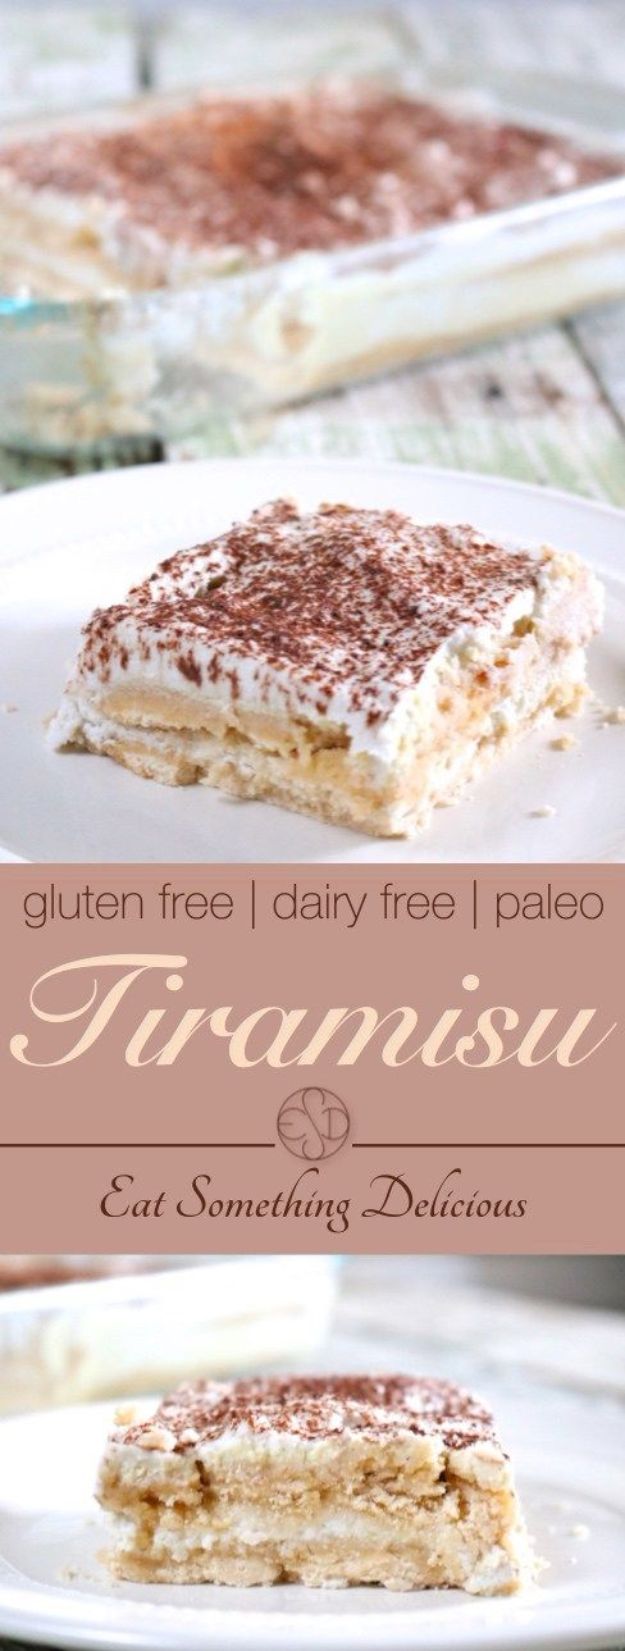 Gluten Free Desserts - Gluten Free Tiramisu - Easy Recipes and Healthy Recipe Ideas for Cookies, Cake, Pie, Cupcakes, Cheesecake and Ice Cream - Best No Sugar Glutenfree Chocolate, No Bake Dessert, Fruit, Peach, Apple and Banana Dishes - Flourless Christmas, Thanksgiving and Holiday Dishes #glutenfree #desserts #recipes